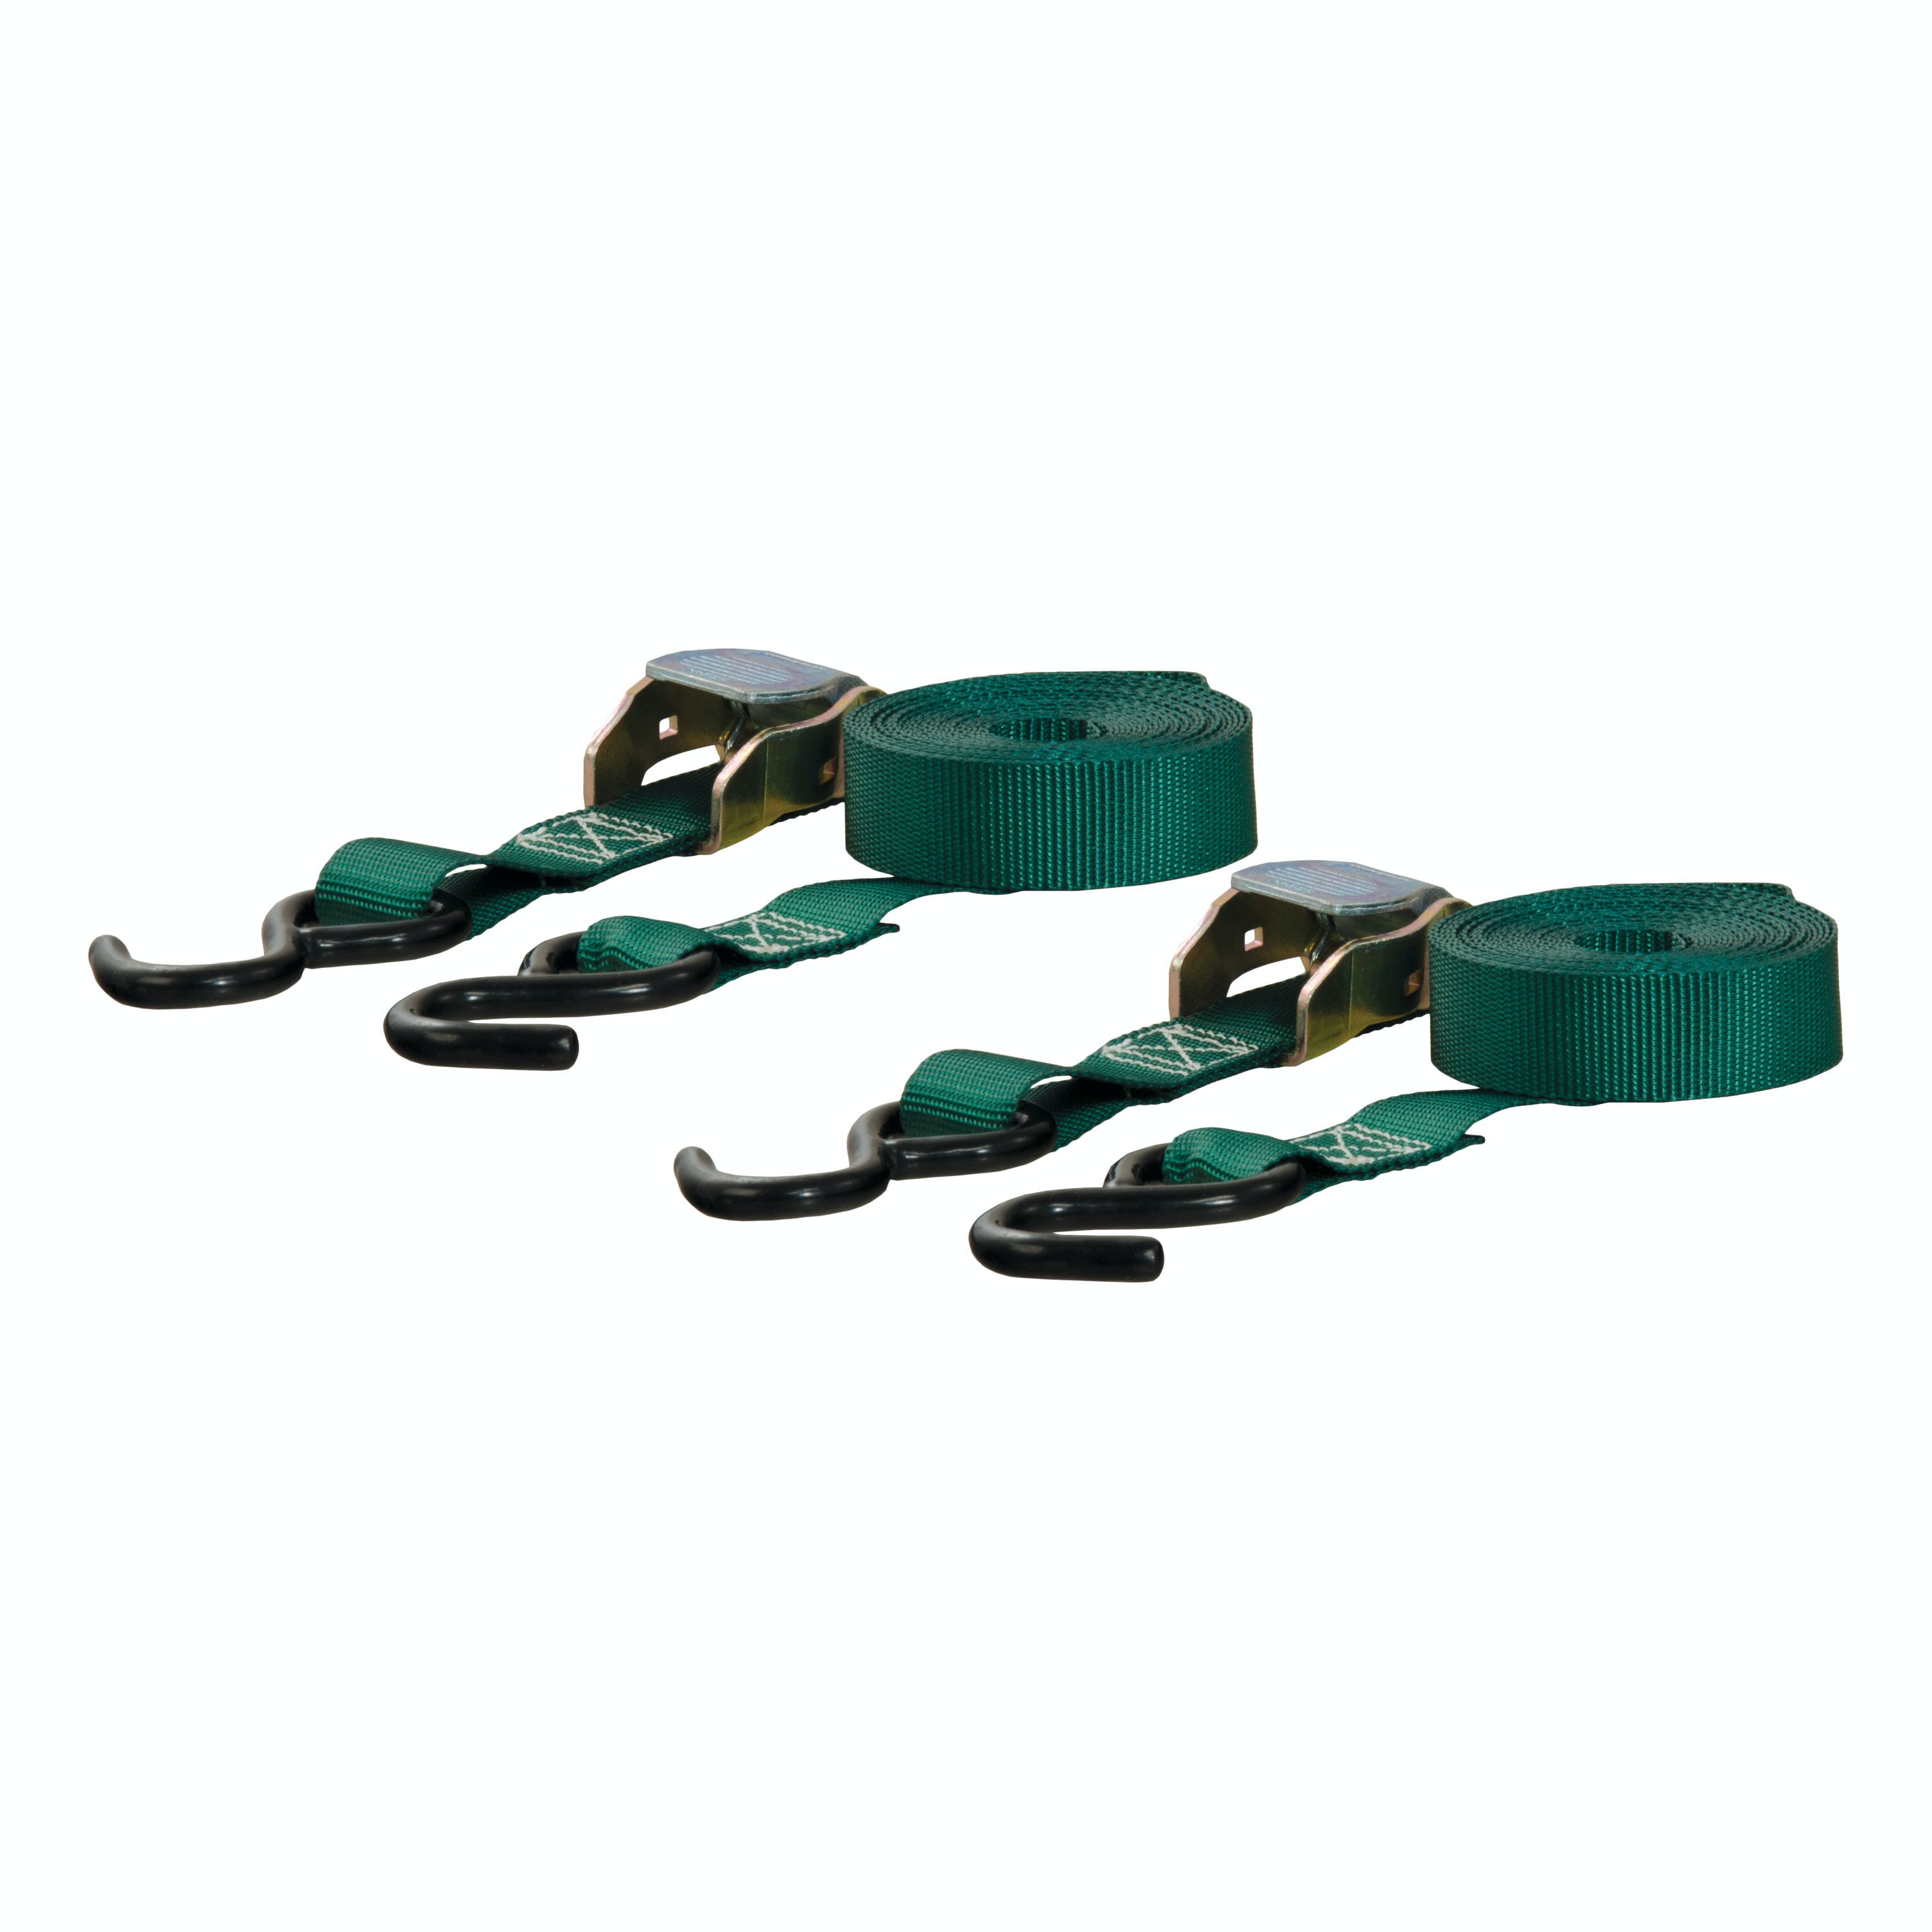 CURT 83015 15' Dark Green Cargo Straps with S-Hooks (300 lbs, 2-Pack)